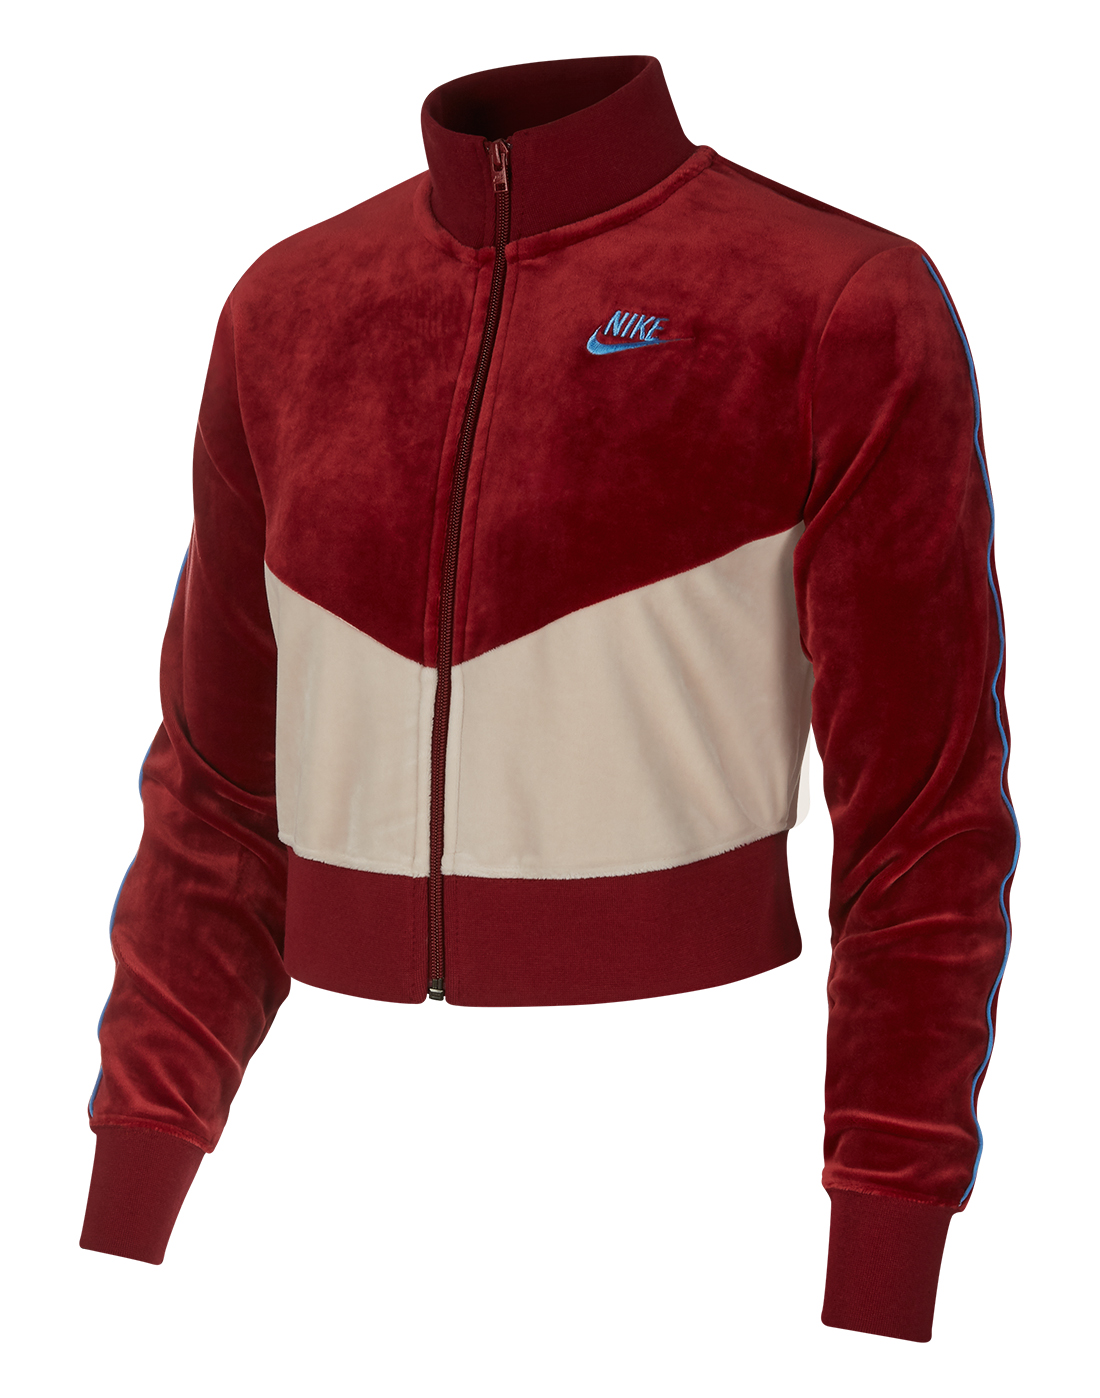 Nike Womens Heritage Plush Jacket - Red | Life Style Sports IE